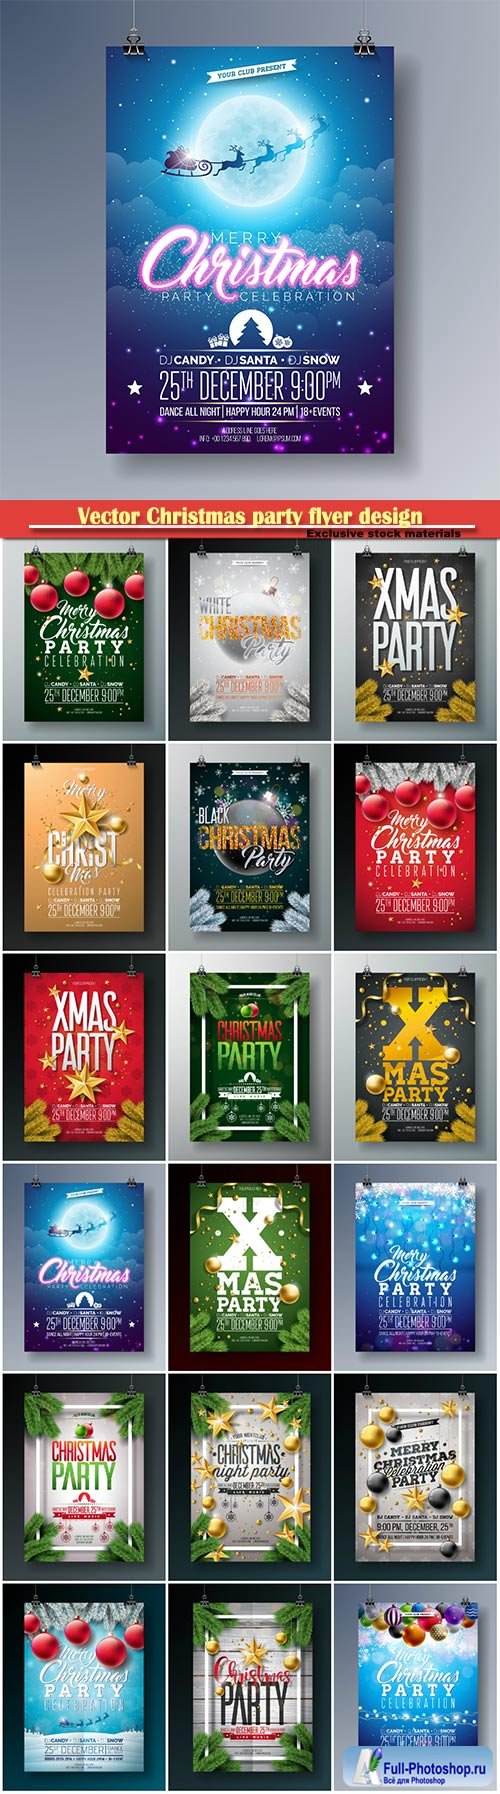 Vector Christmas party flyer design, holiday typography elements